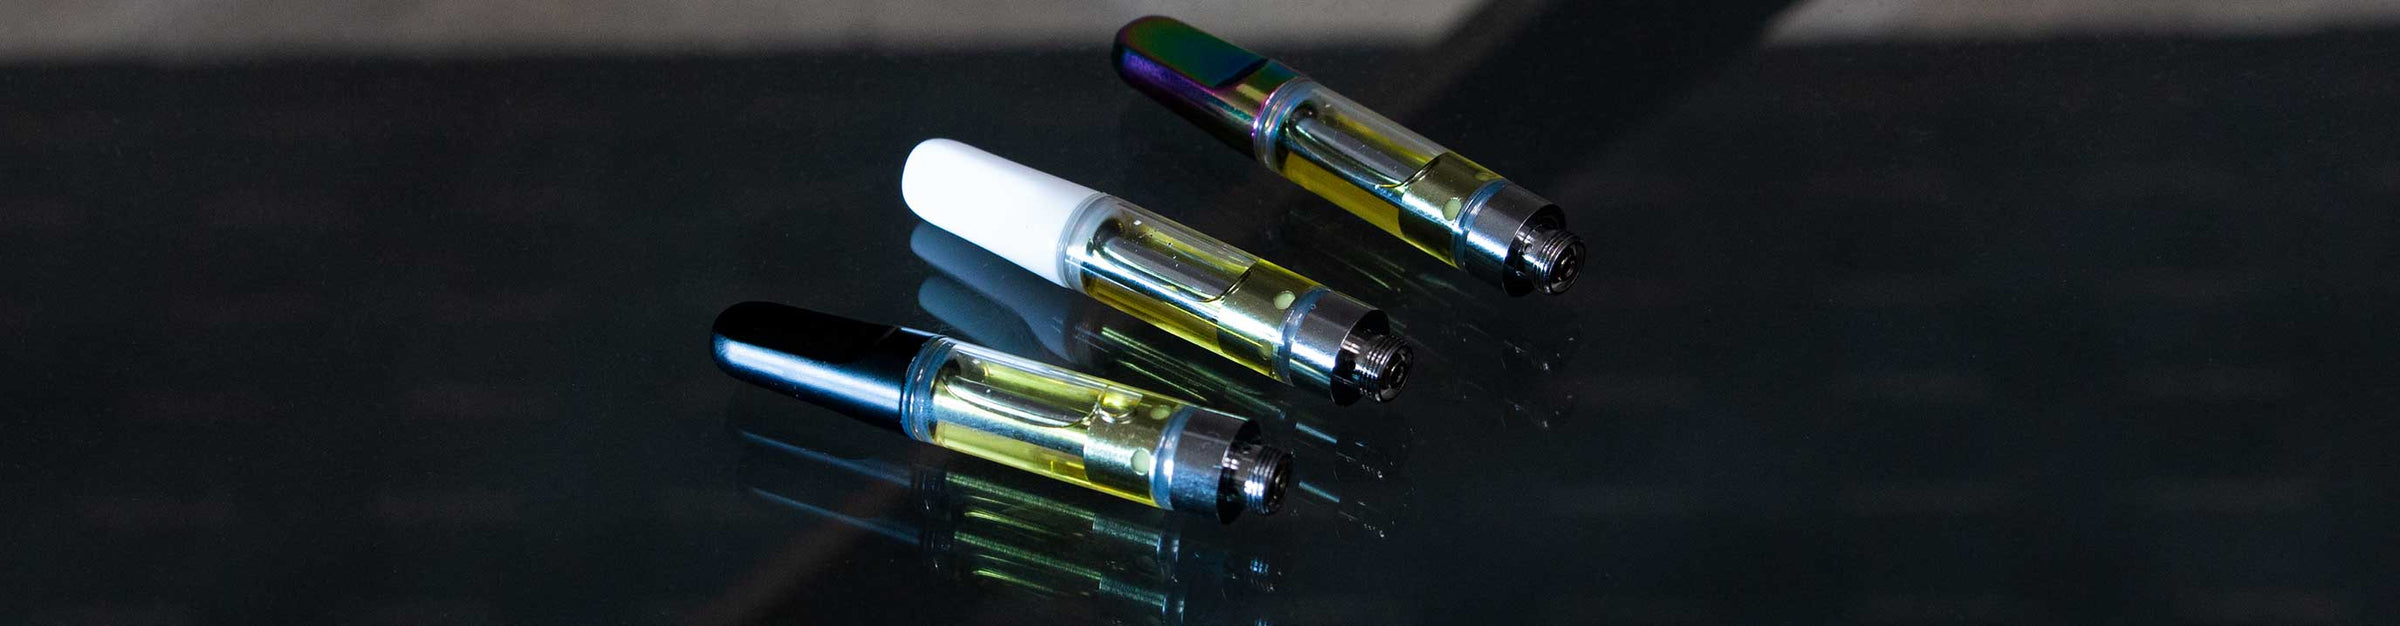 Cartridge Vaporizers laying down on glass table inside office.